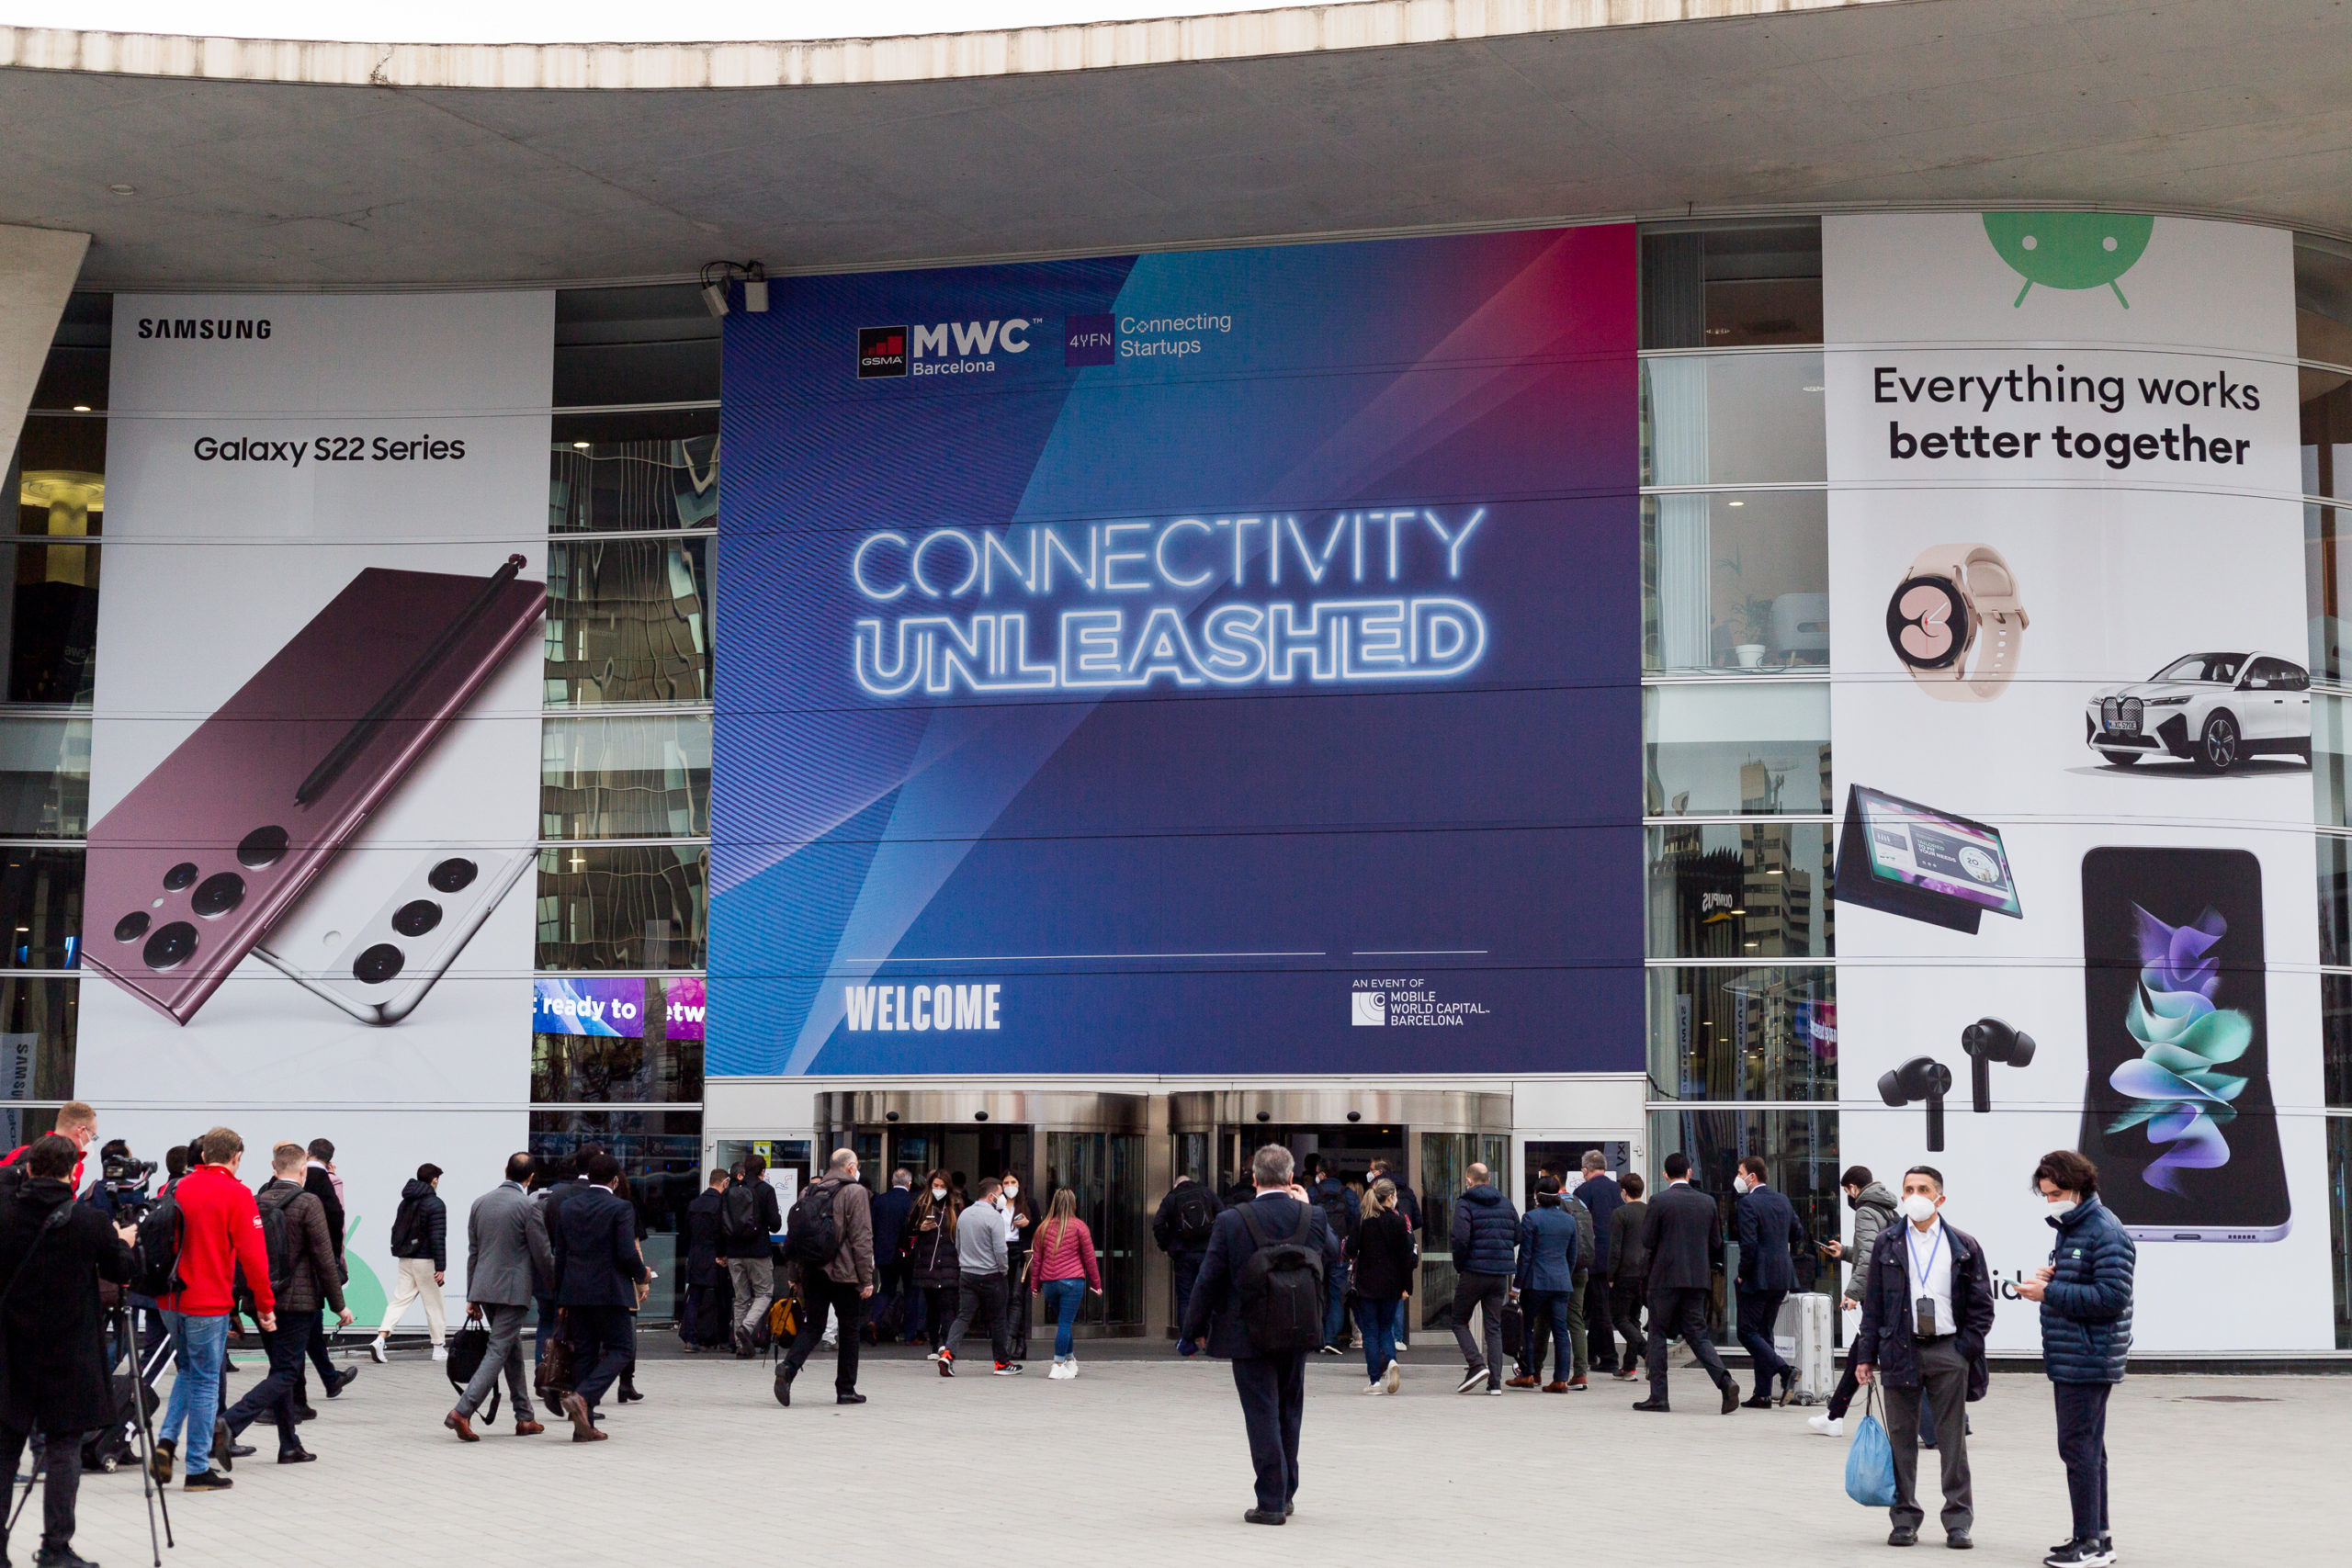 Attendees outside the venue for Mobile World Congress